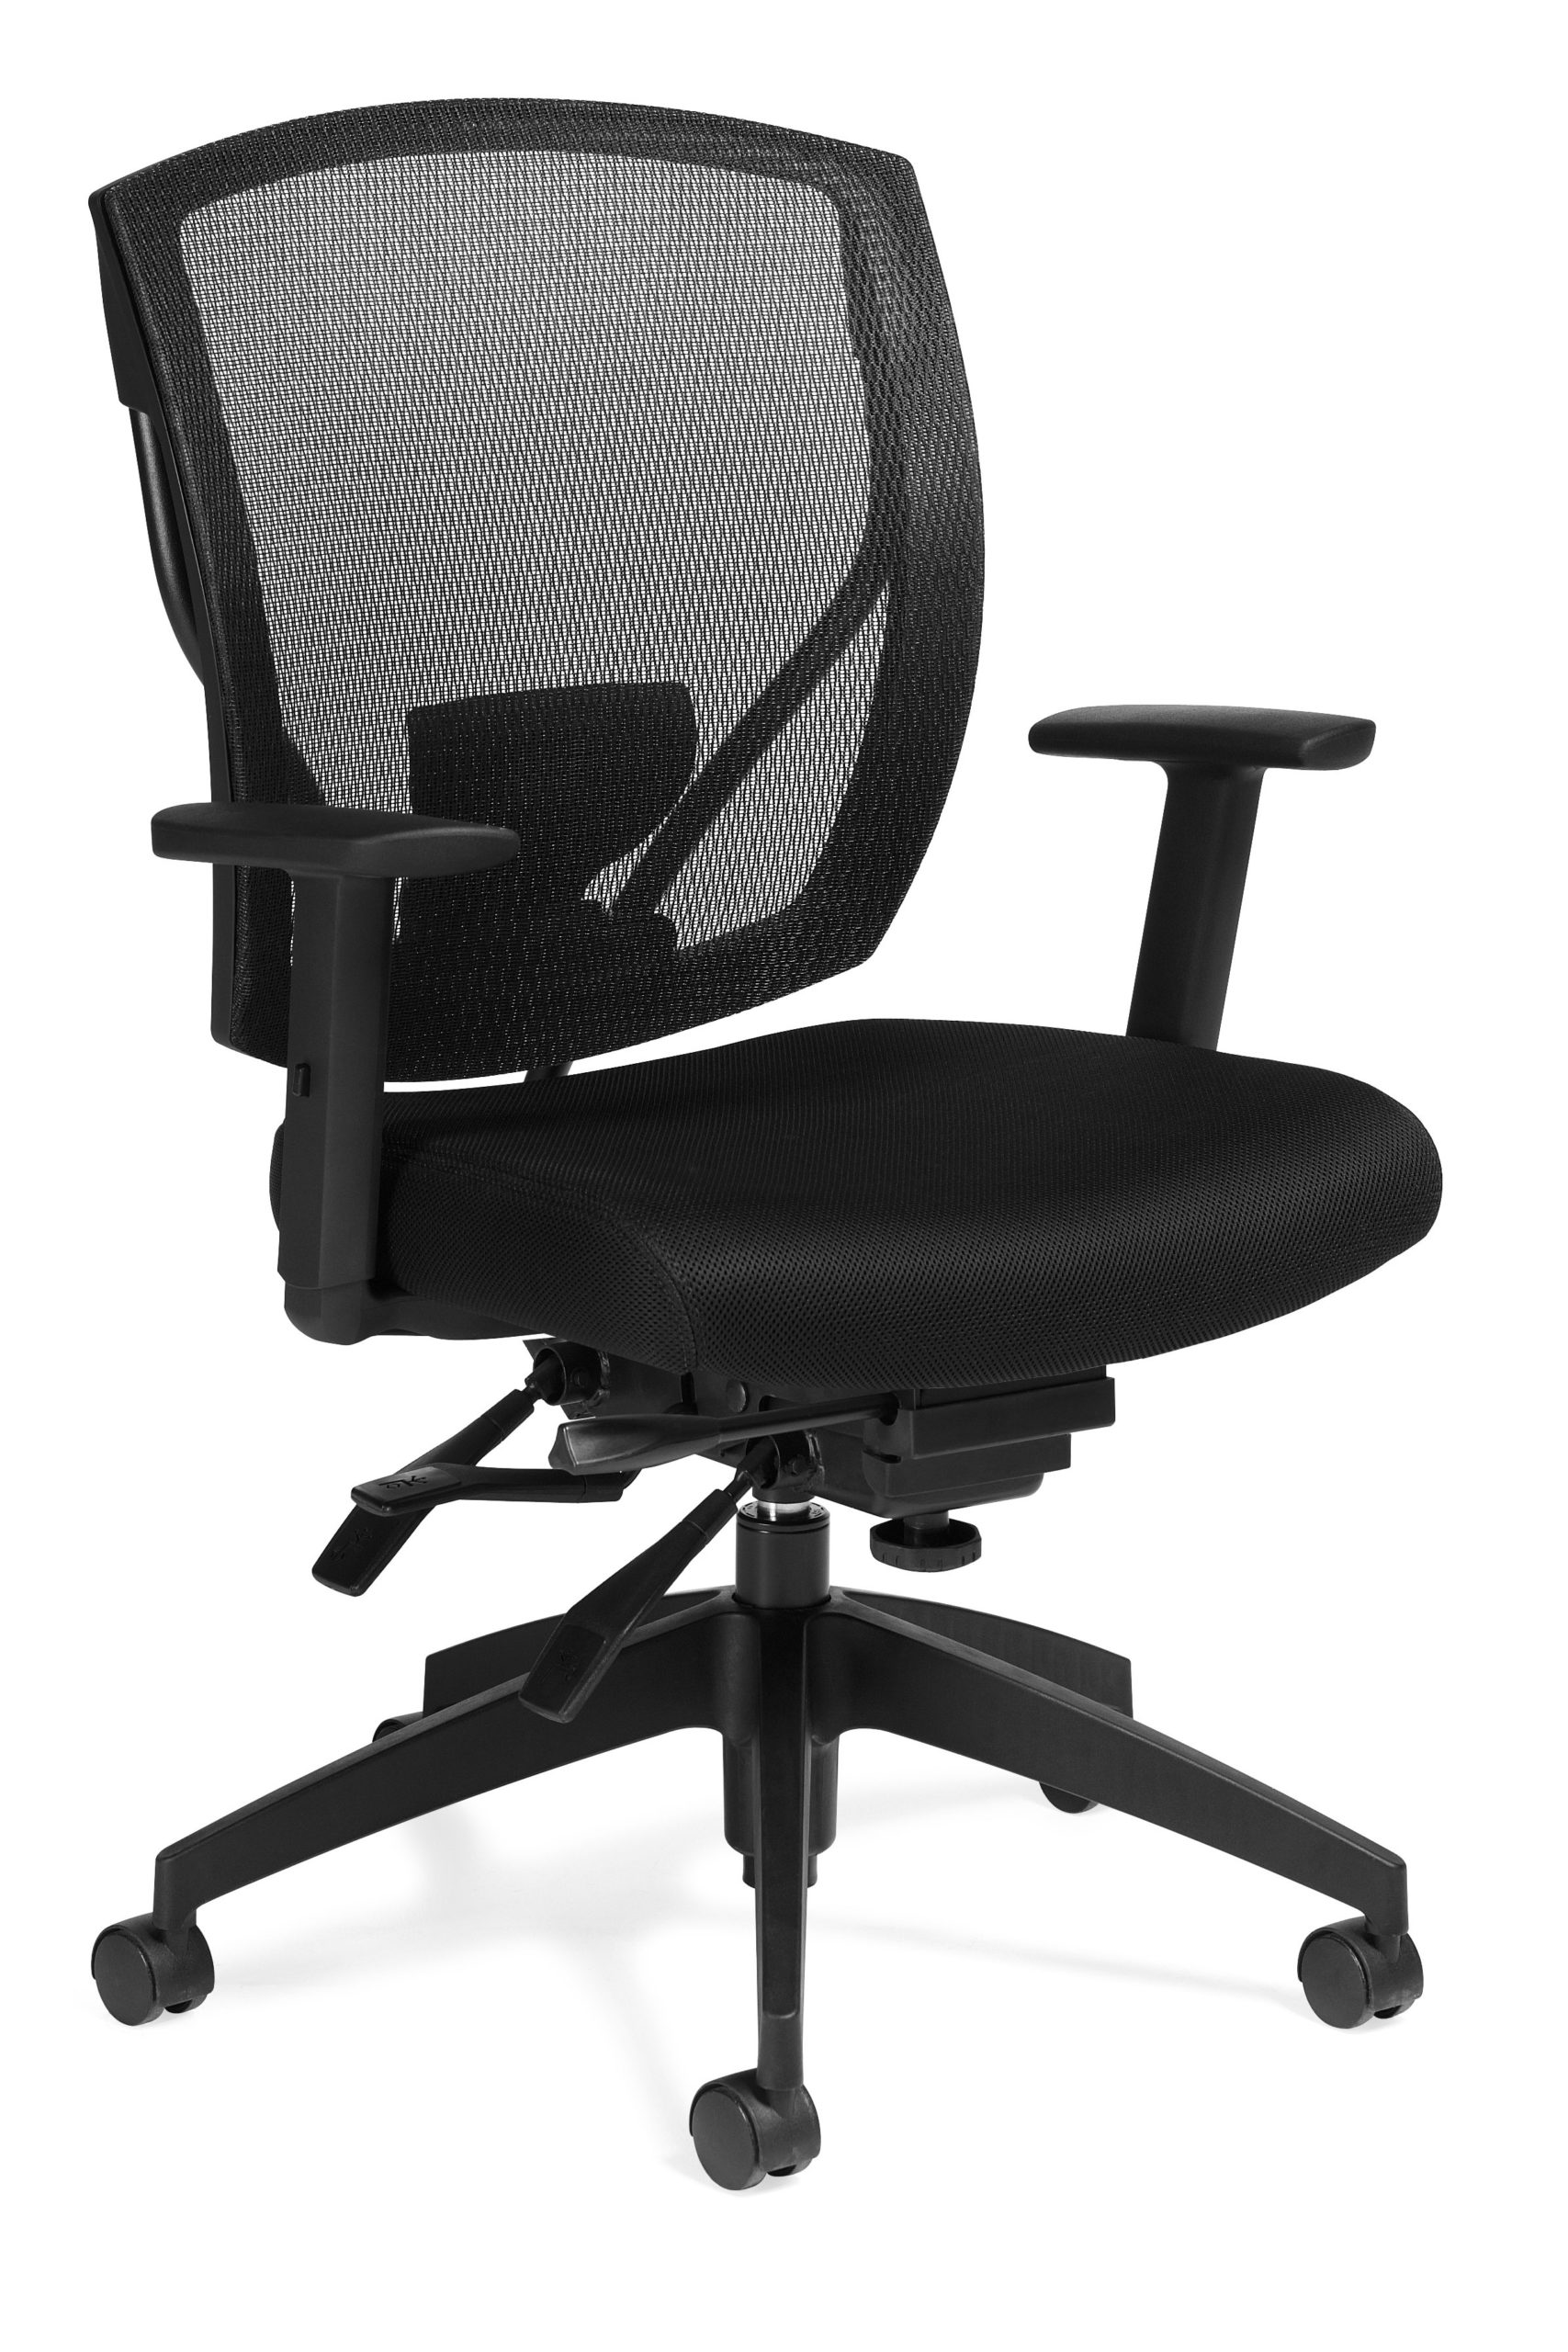 Multi-function medium mesh back task chair with black fabric seat, multiple paddles for complete ergonomic adjustments, tilt tension knob, and 5-star plastic base.